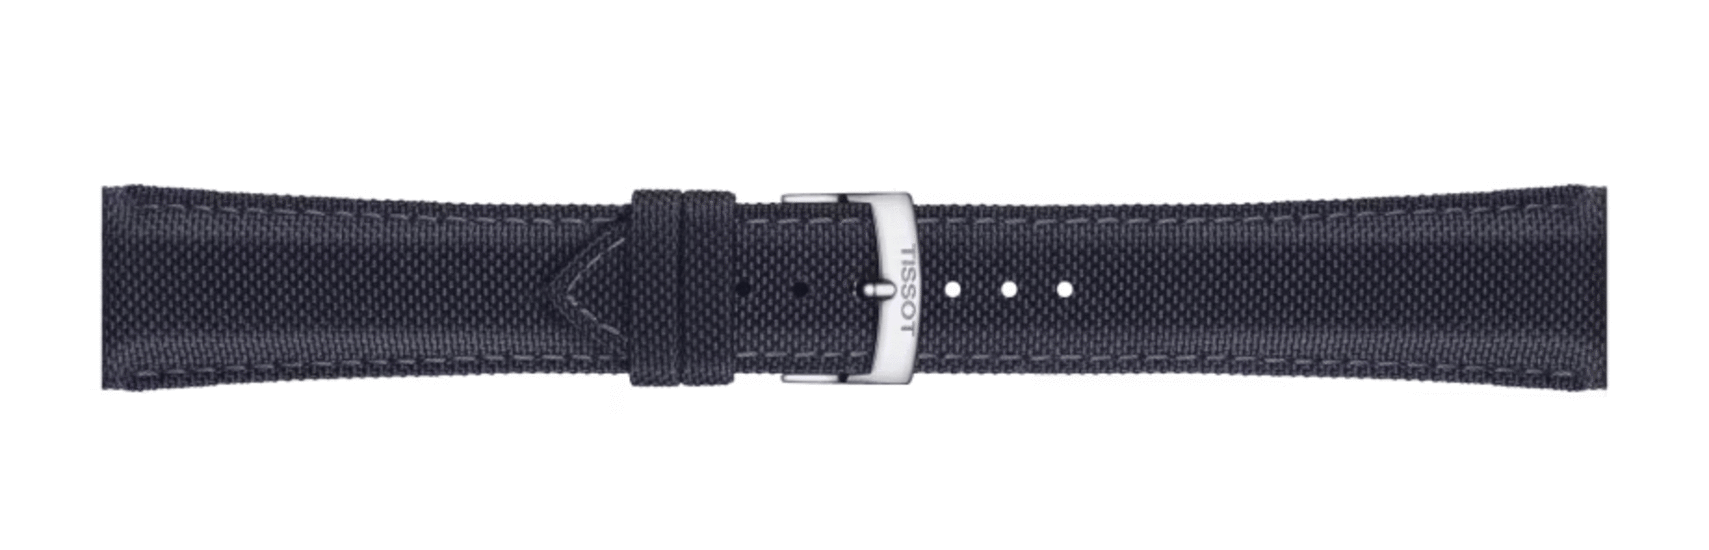 TISSOT OFFICIAL ANTHRACITE FABRIC STRAP LUGS 21 MM T852.048.183